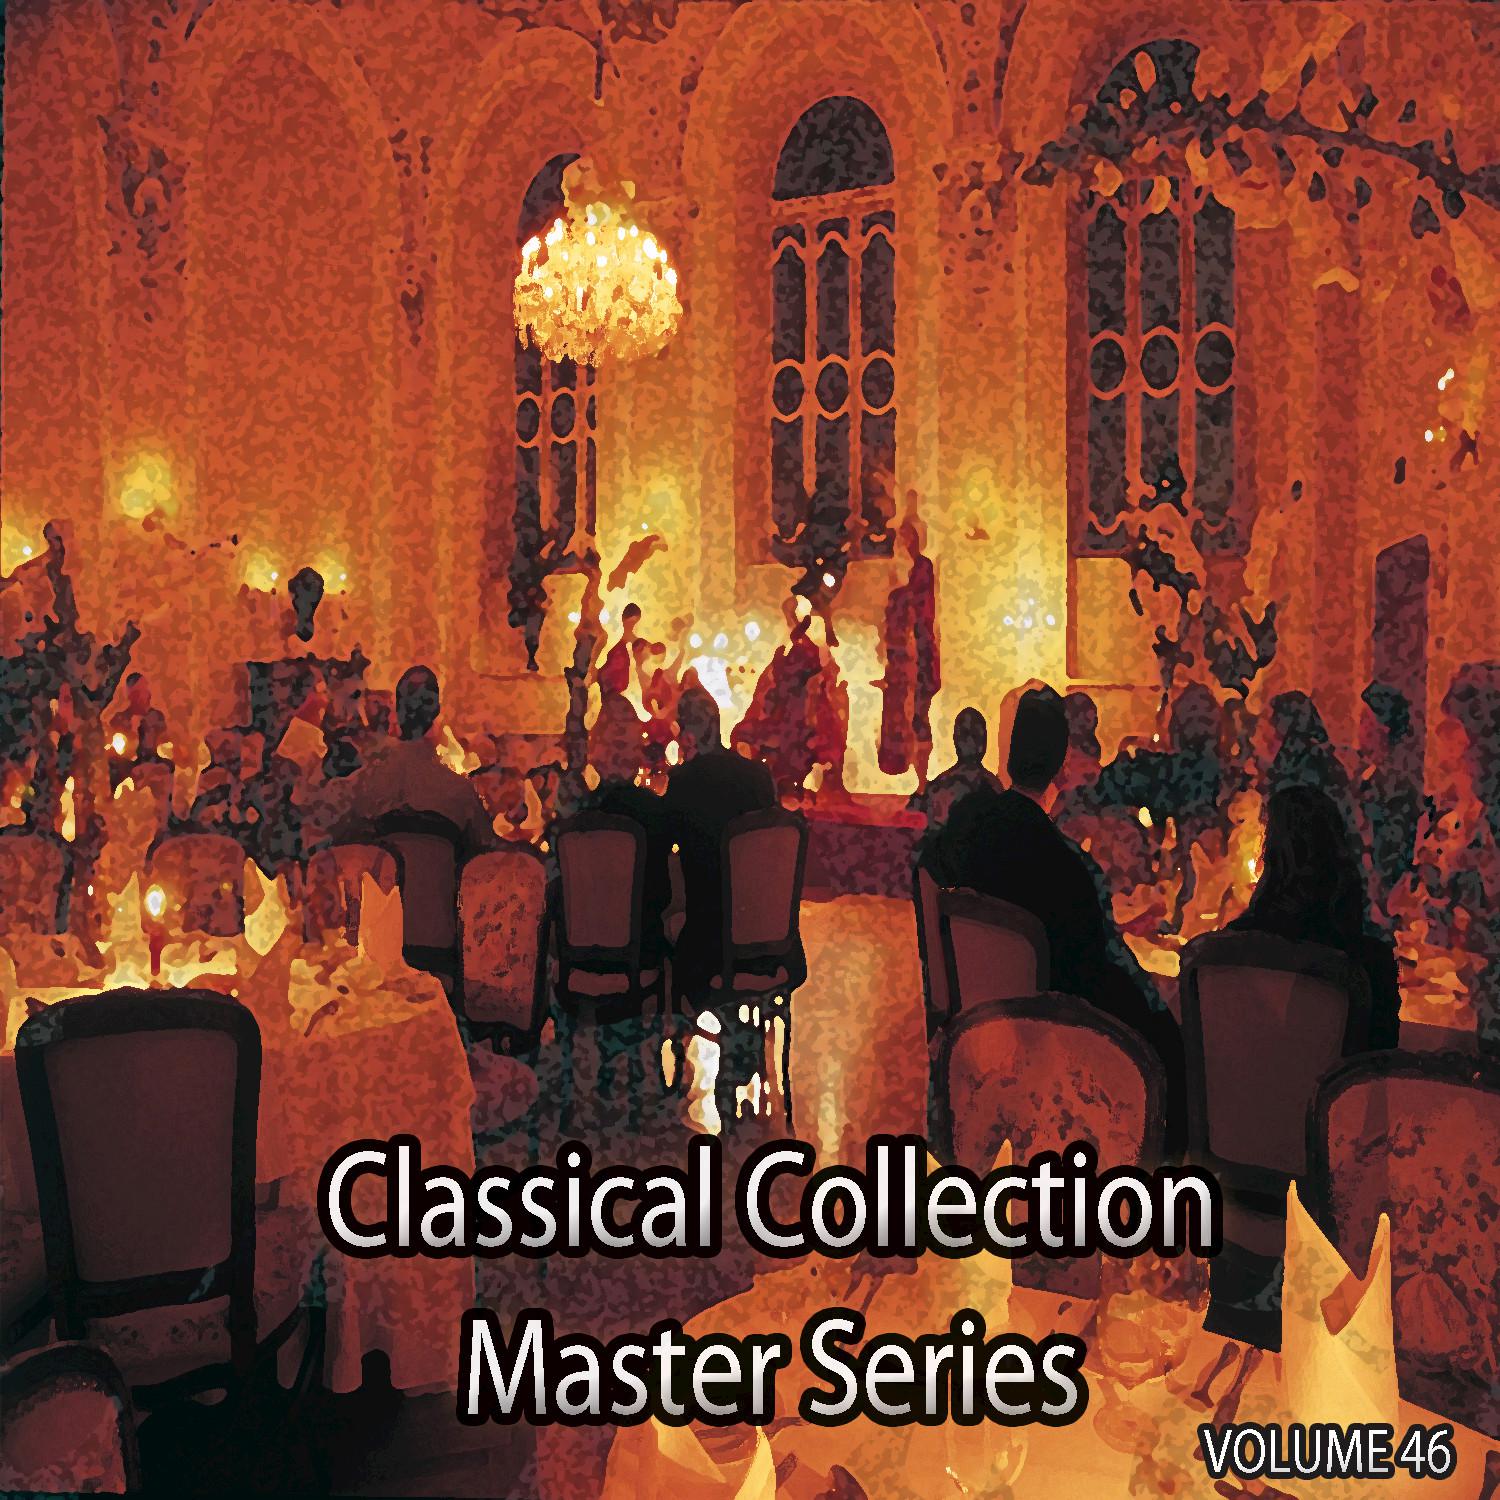 Symphony for Cello and Orchestra, Op. 68: III. Adagio, Cadenza, Pt. 2